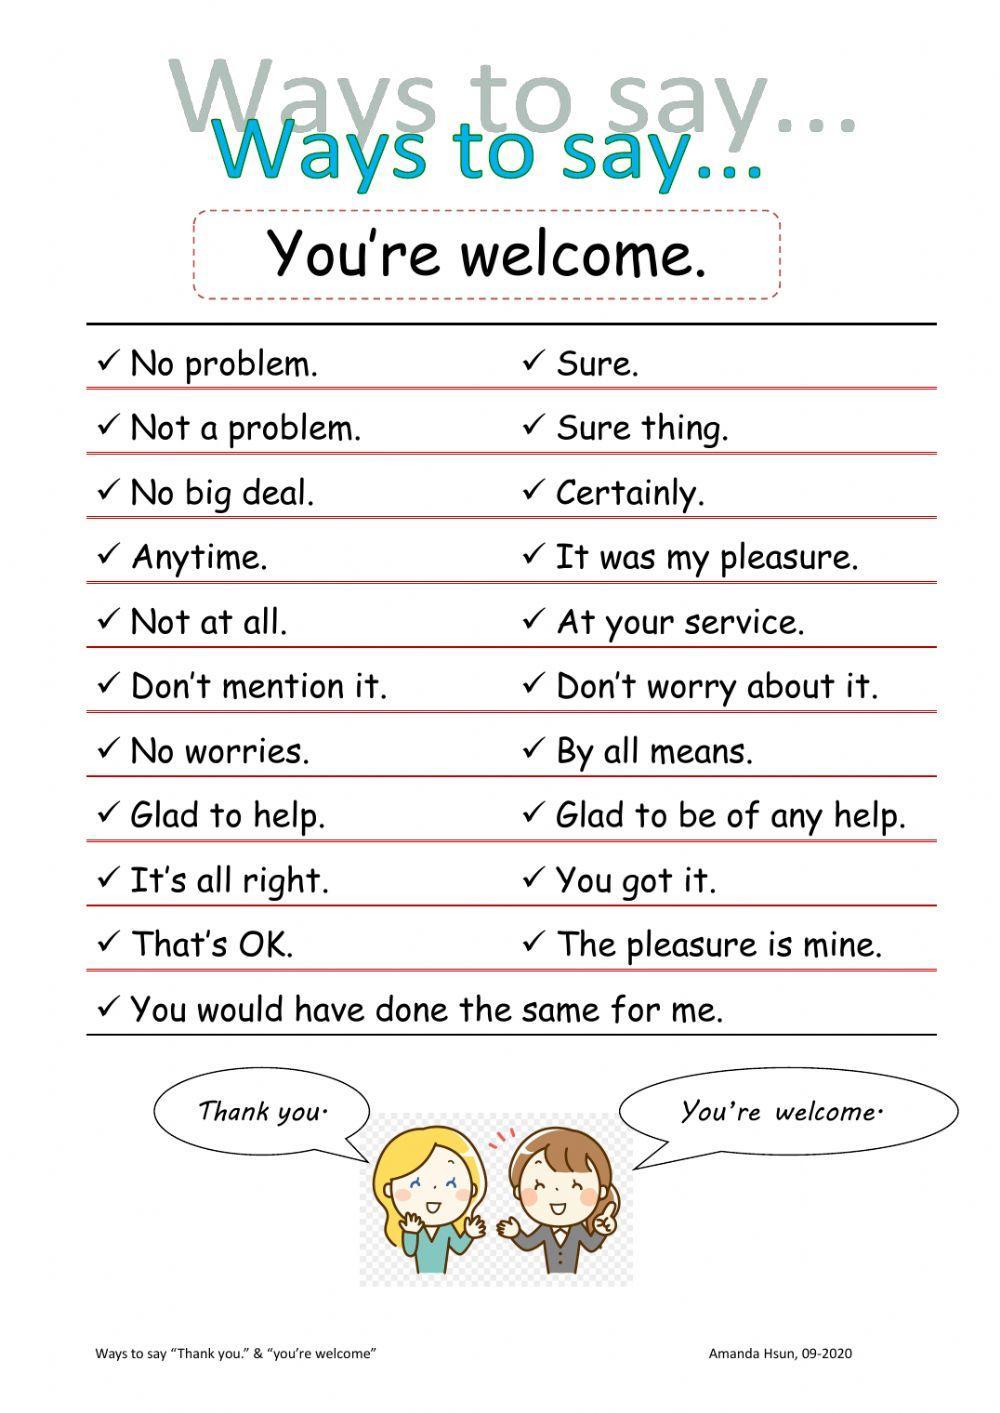 ways to say thanks and welcome